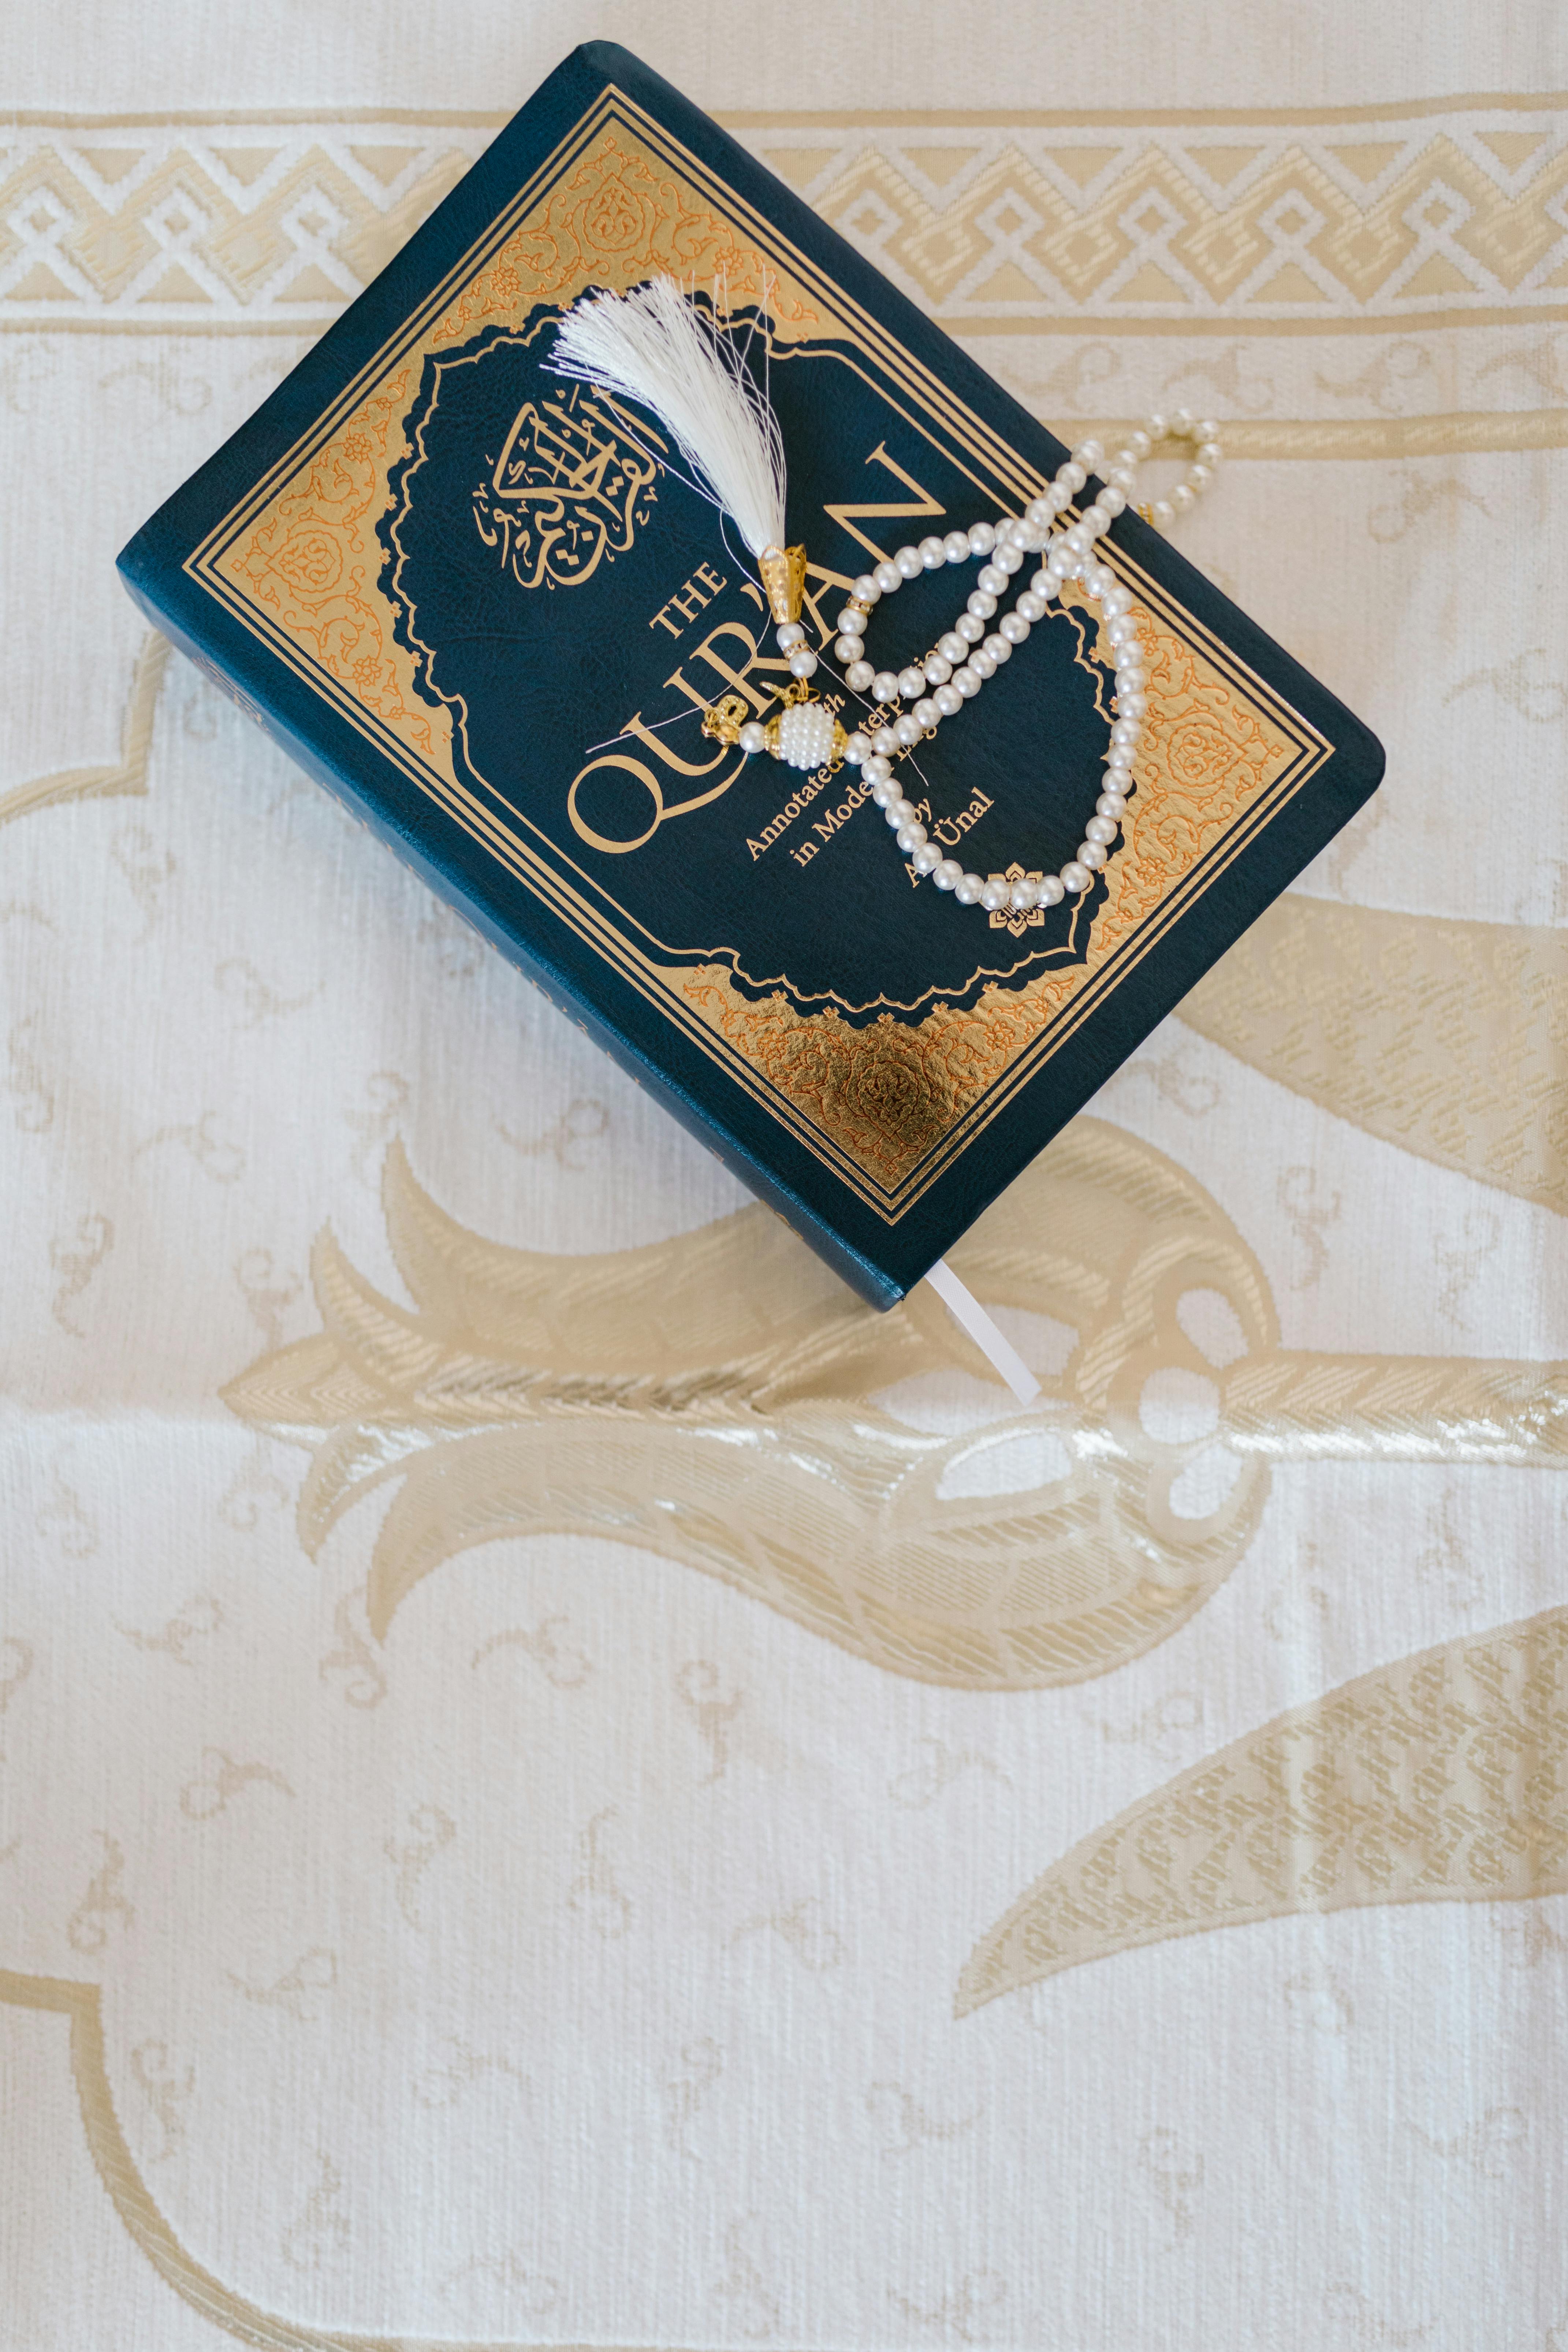 Quran Photos, Download The BEST Free Quran Stock Photos & HD Images